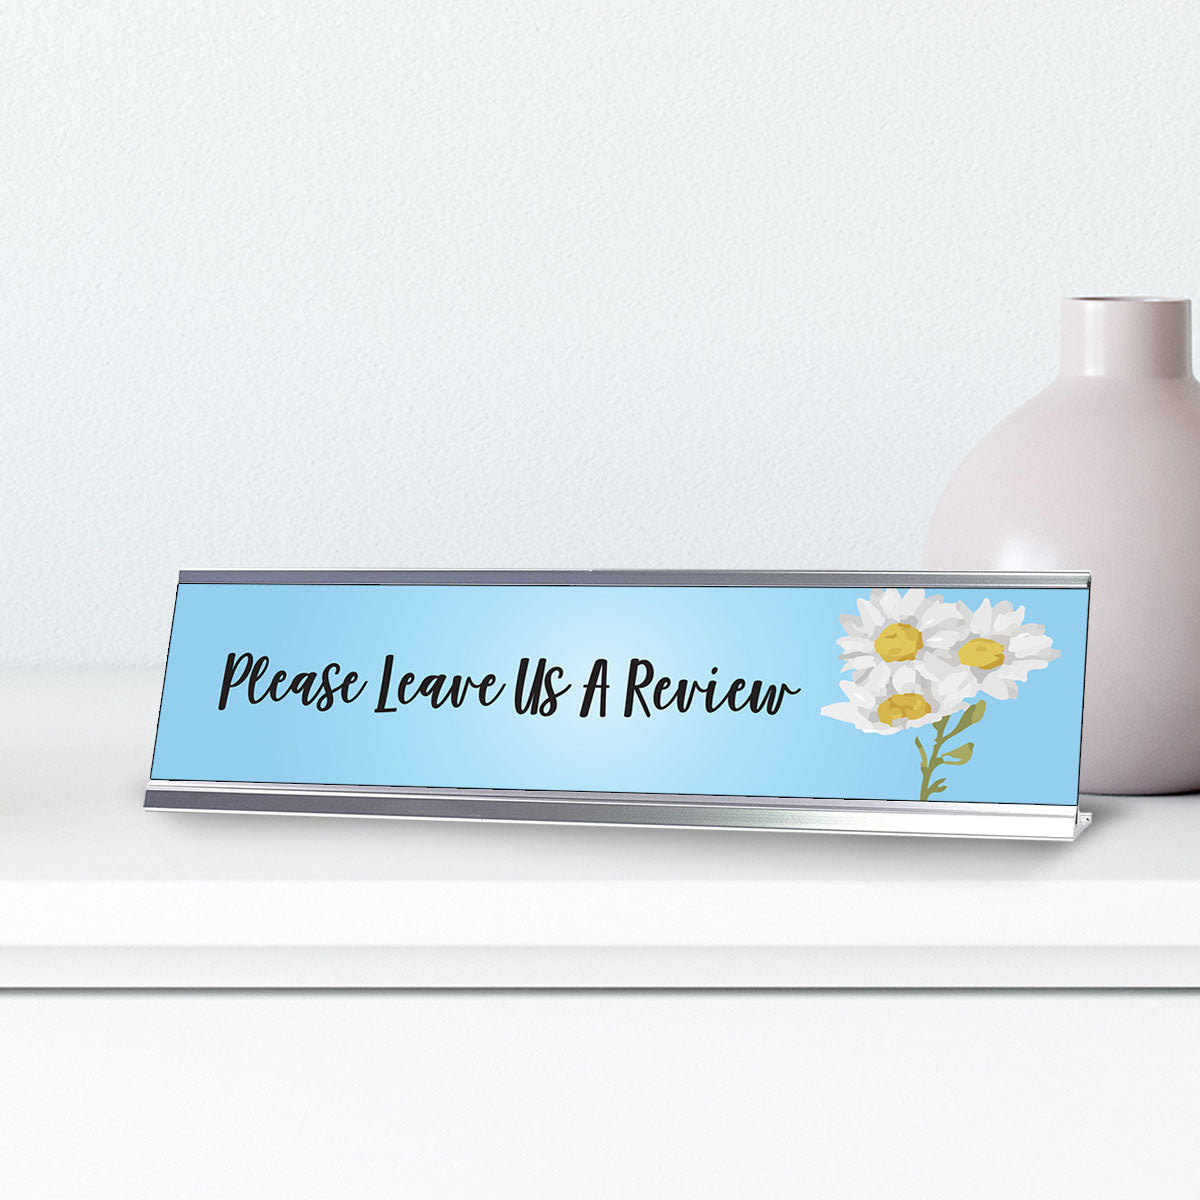 Please Leave Us A Review, Desk Sign or Front Desk Counter Sign (2 x 8")